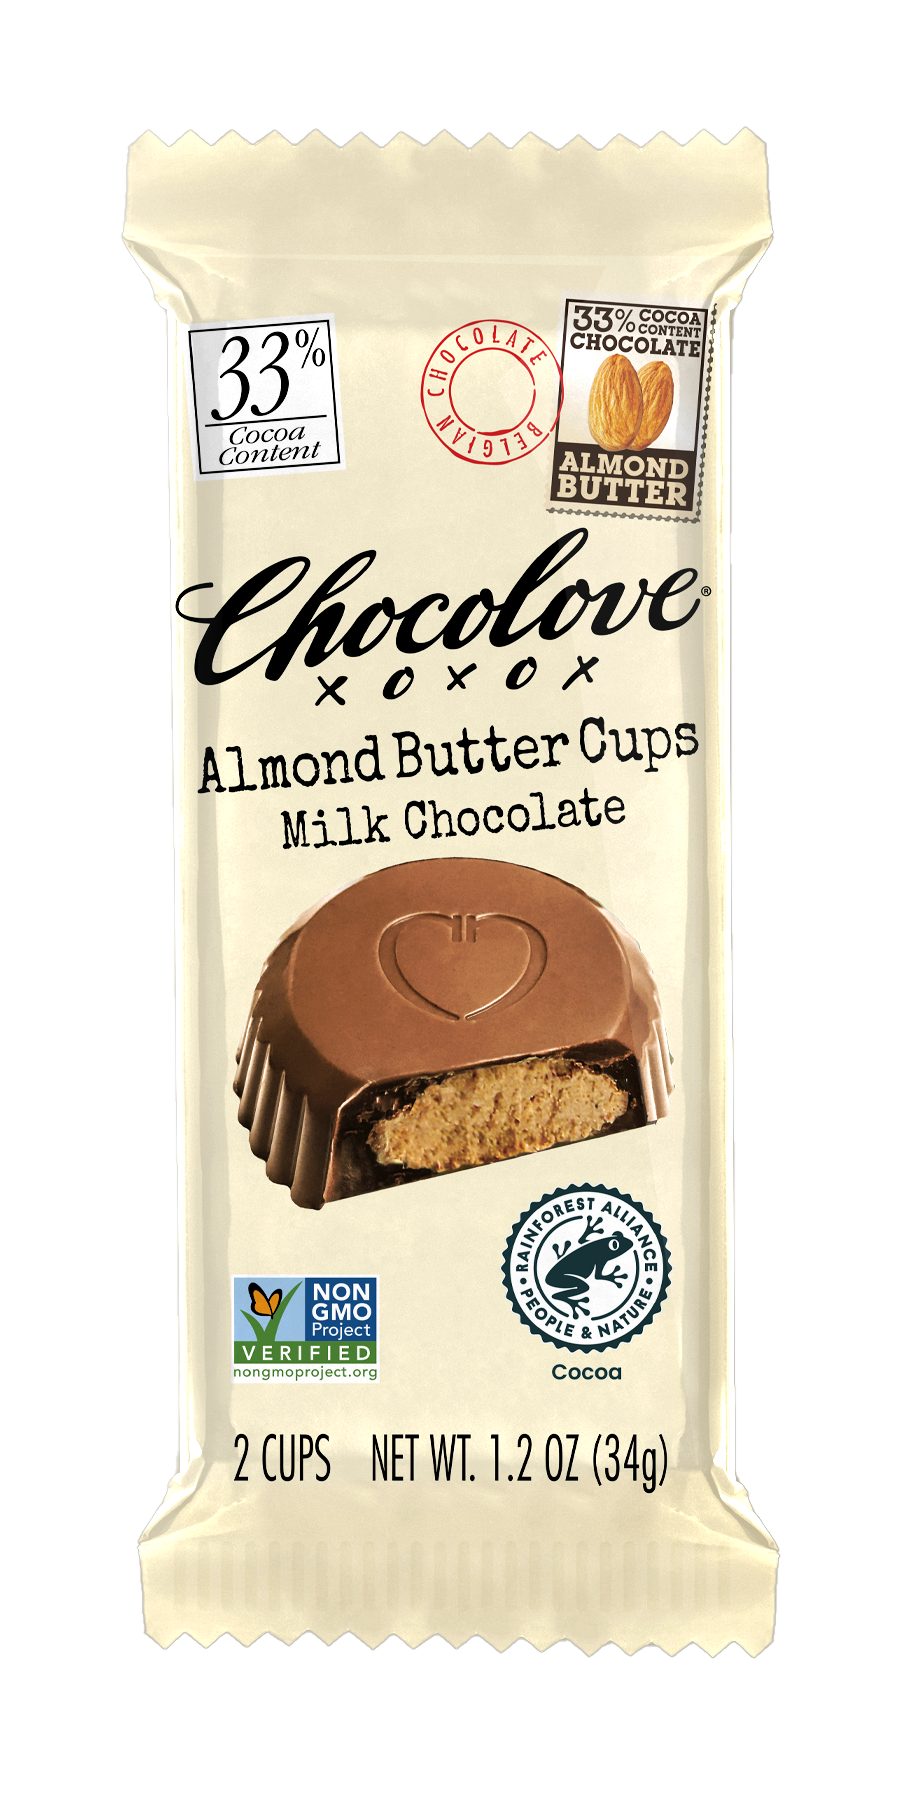 https://www.chocolove.com/wp-content/uploads/2023/01/Chocolove-Vertical-2pk-Cups-Almond-Butter-Milk-Chocolate.png